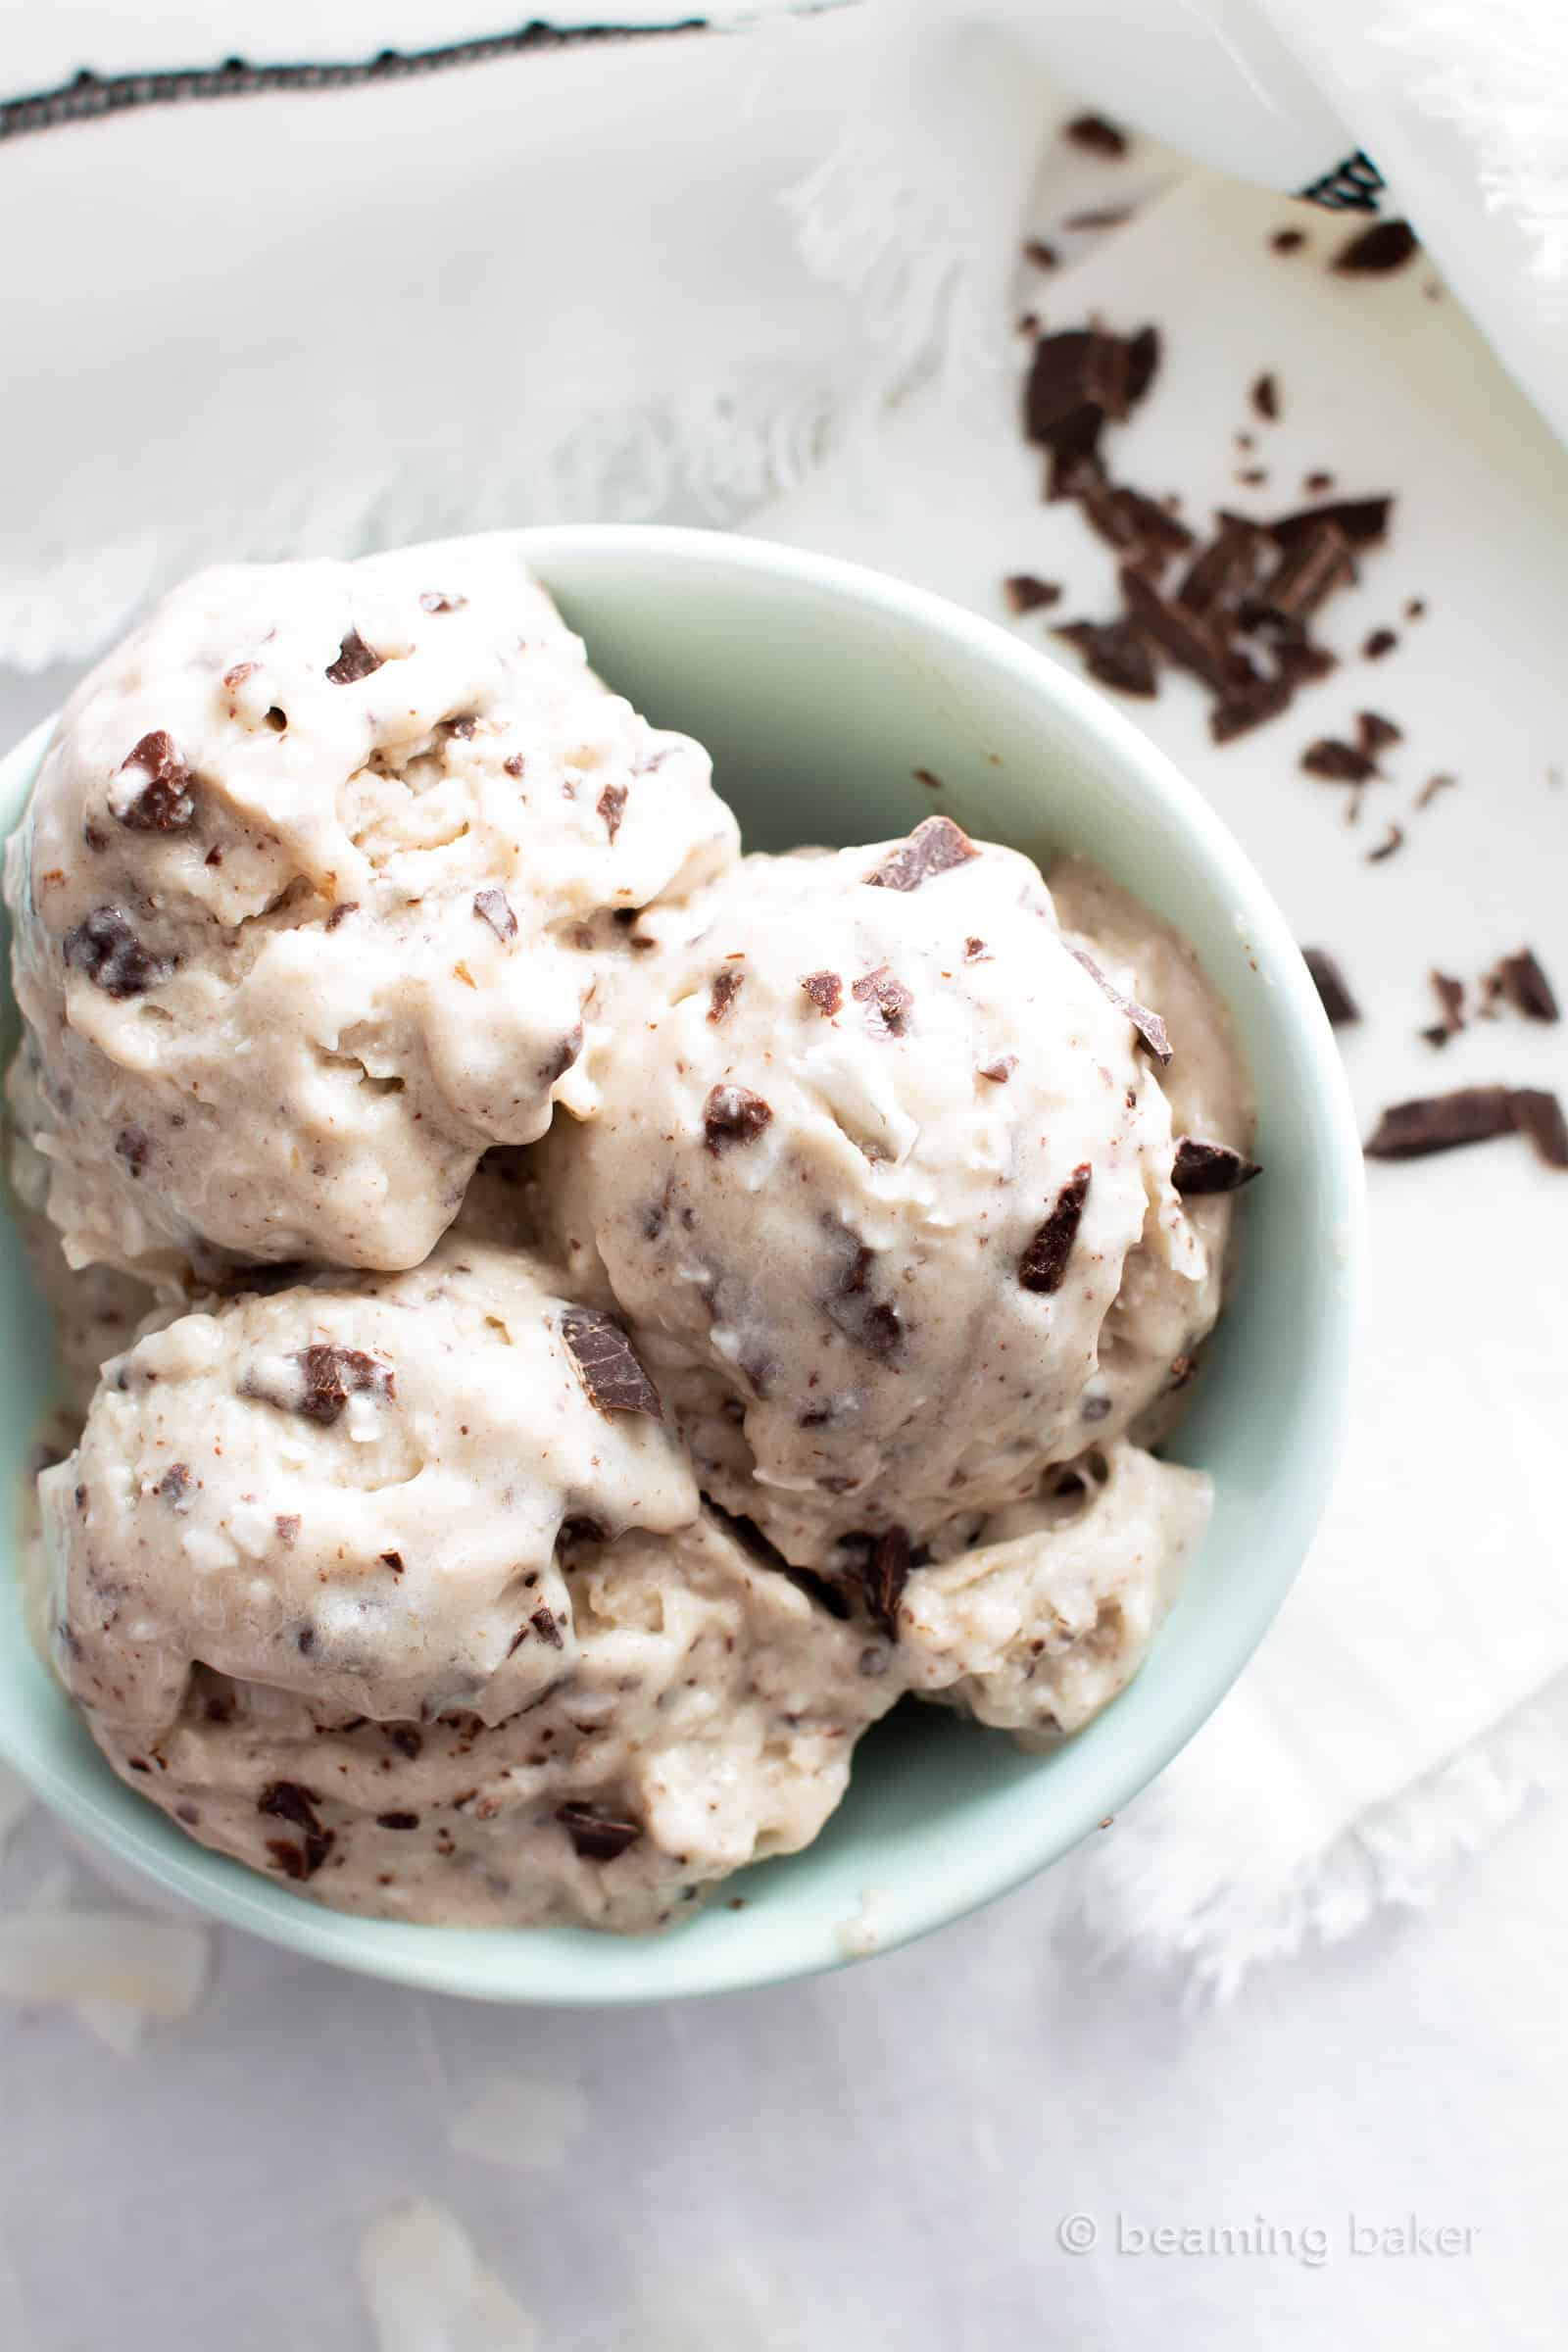 Coconut Chocolate Chip Vegan Ice Cream Recipe: this delicious vegan ice cream recipe is wonderfully rich ‘n creamy! The best homemade vegan ice cream—packed with coconut & chocolate chips, no churn. #Vegan #IceCream #Coconut #ChocolateChip #VeganIceCream | Recipe at BeamingBaker.com